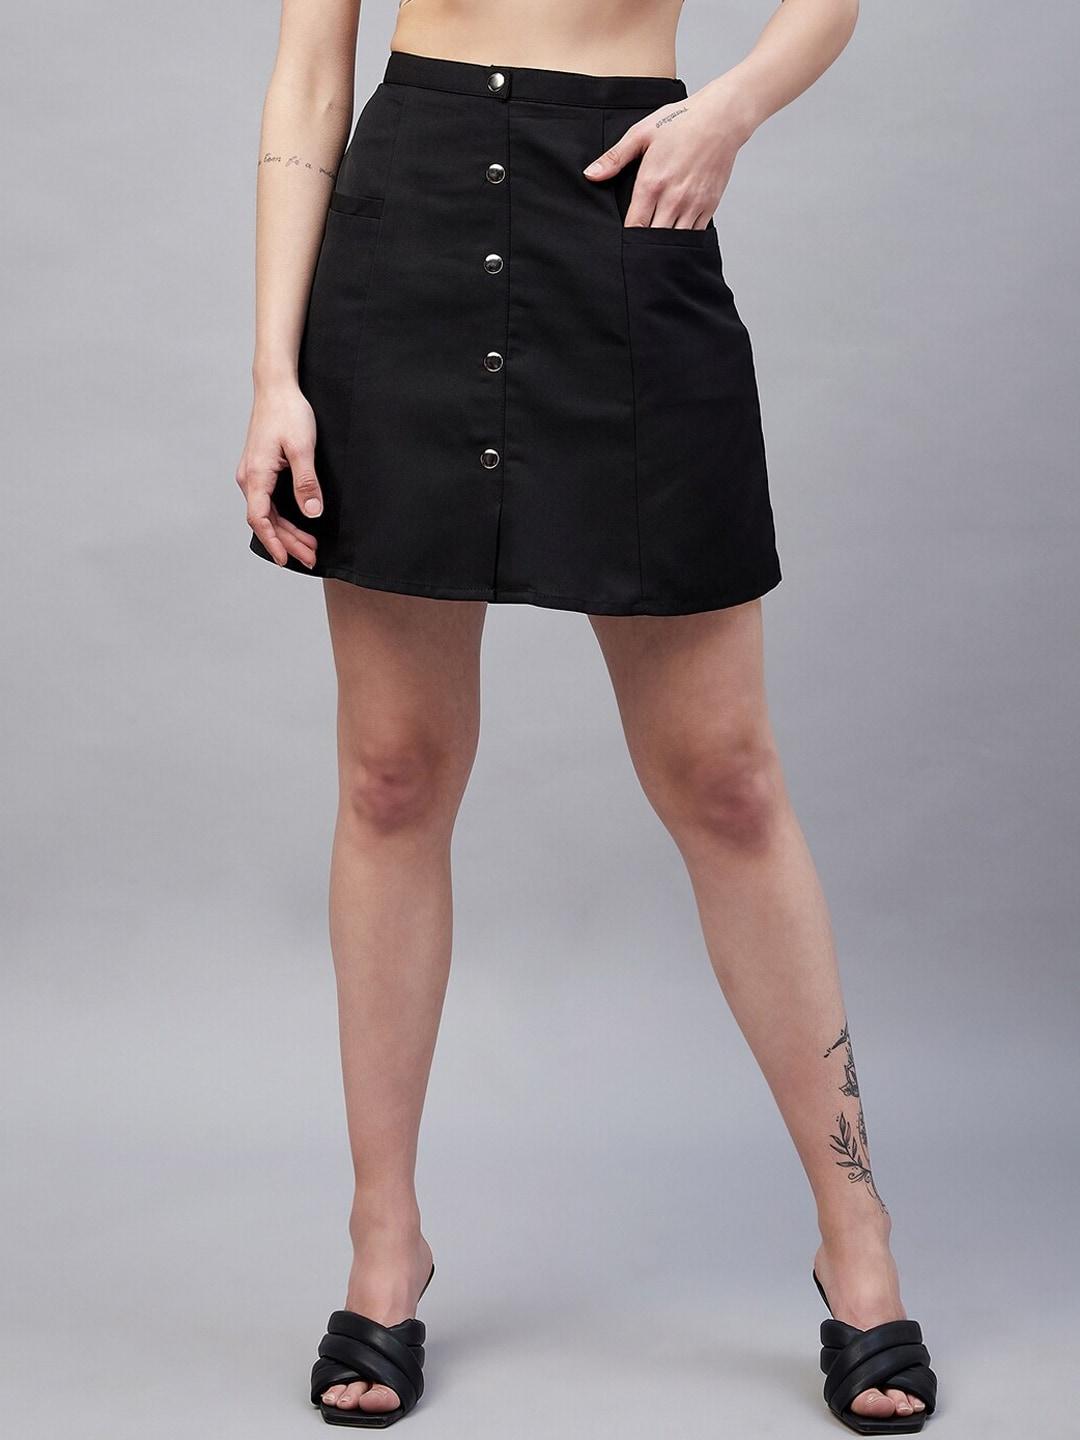 Marie Claire Mini Button Straight Skirt